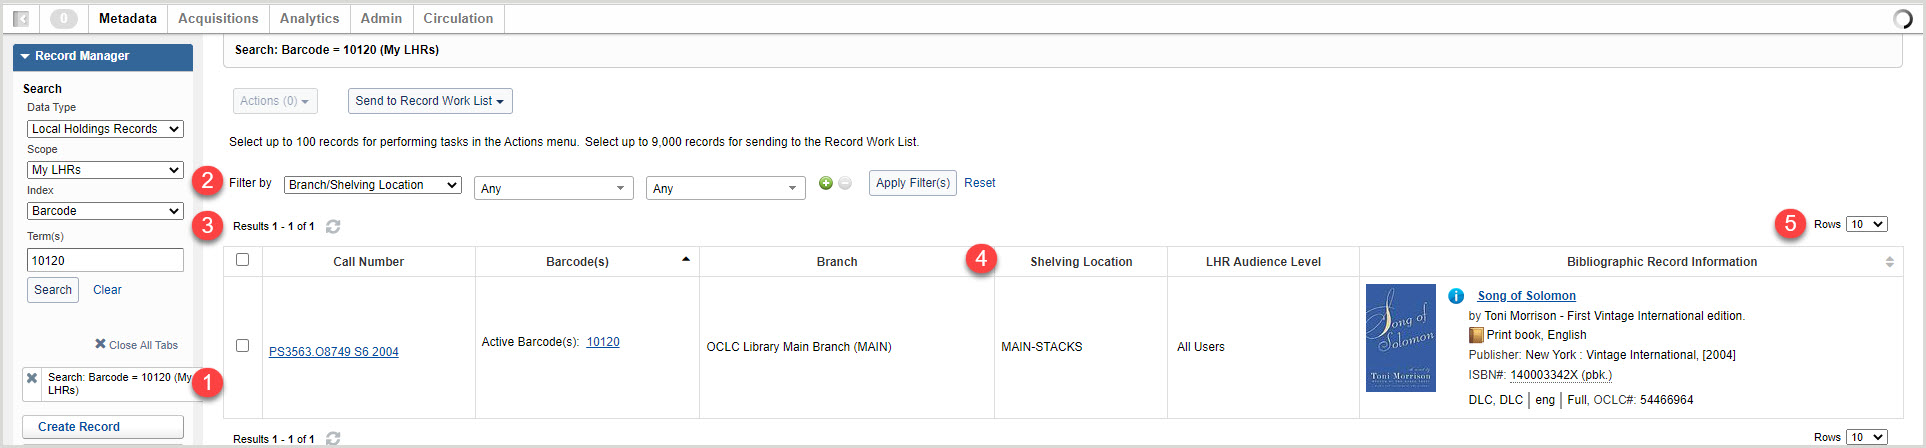 Local holdings records search results screen